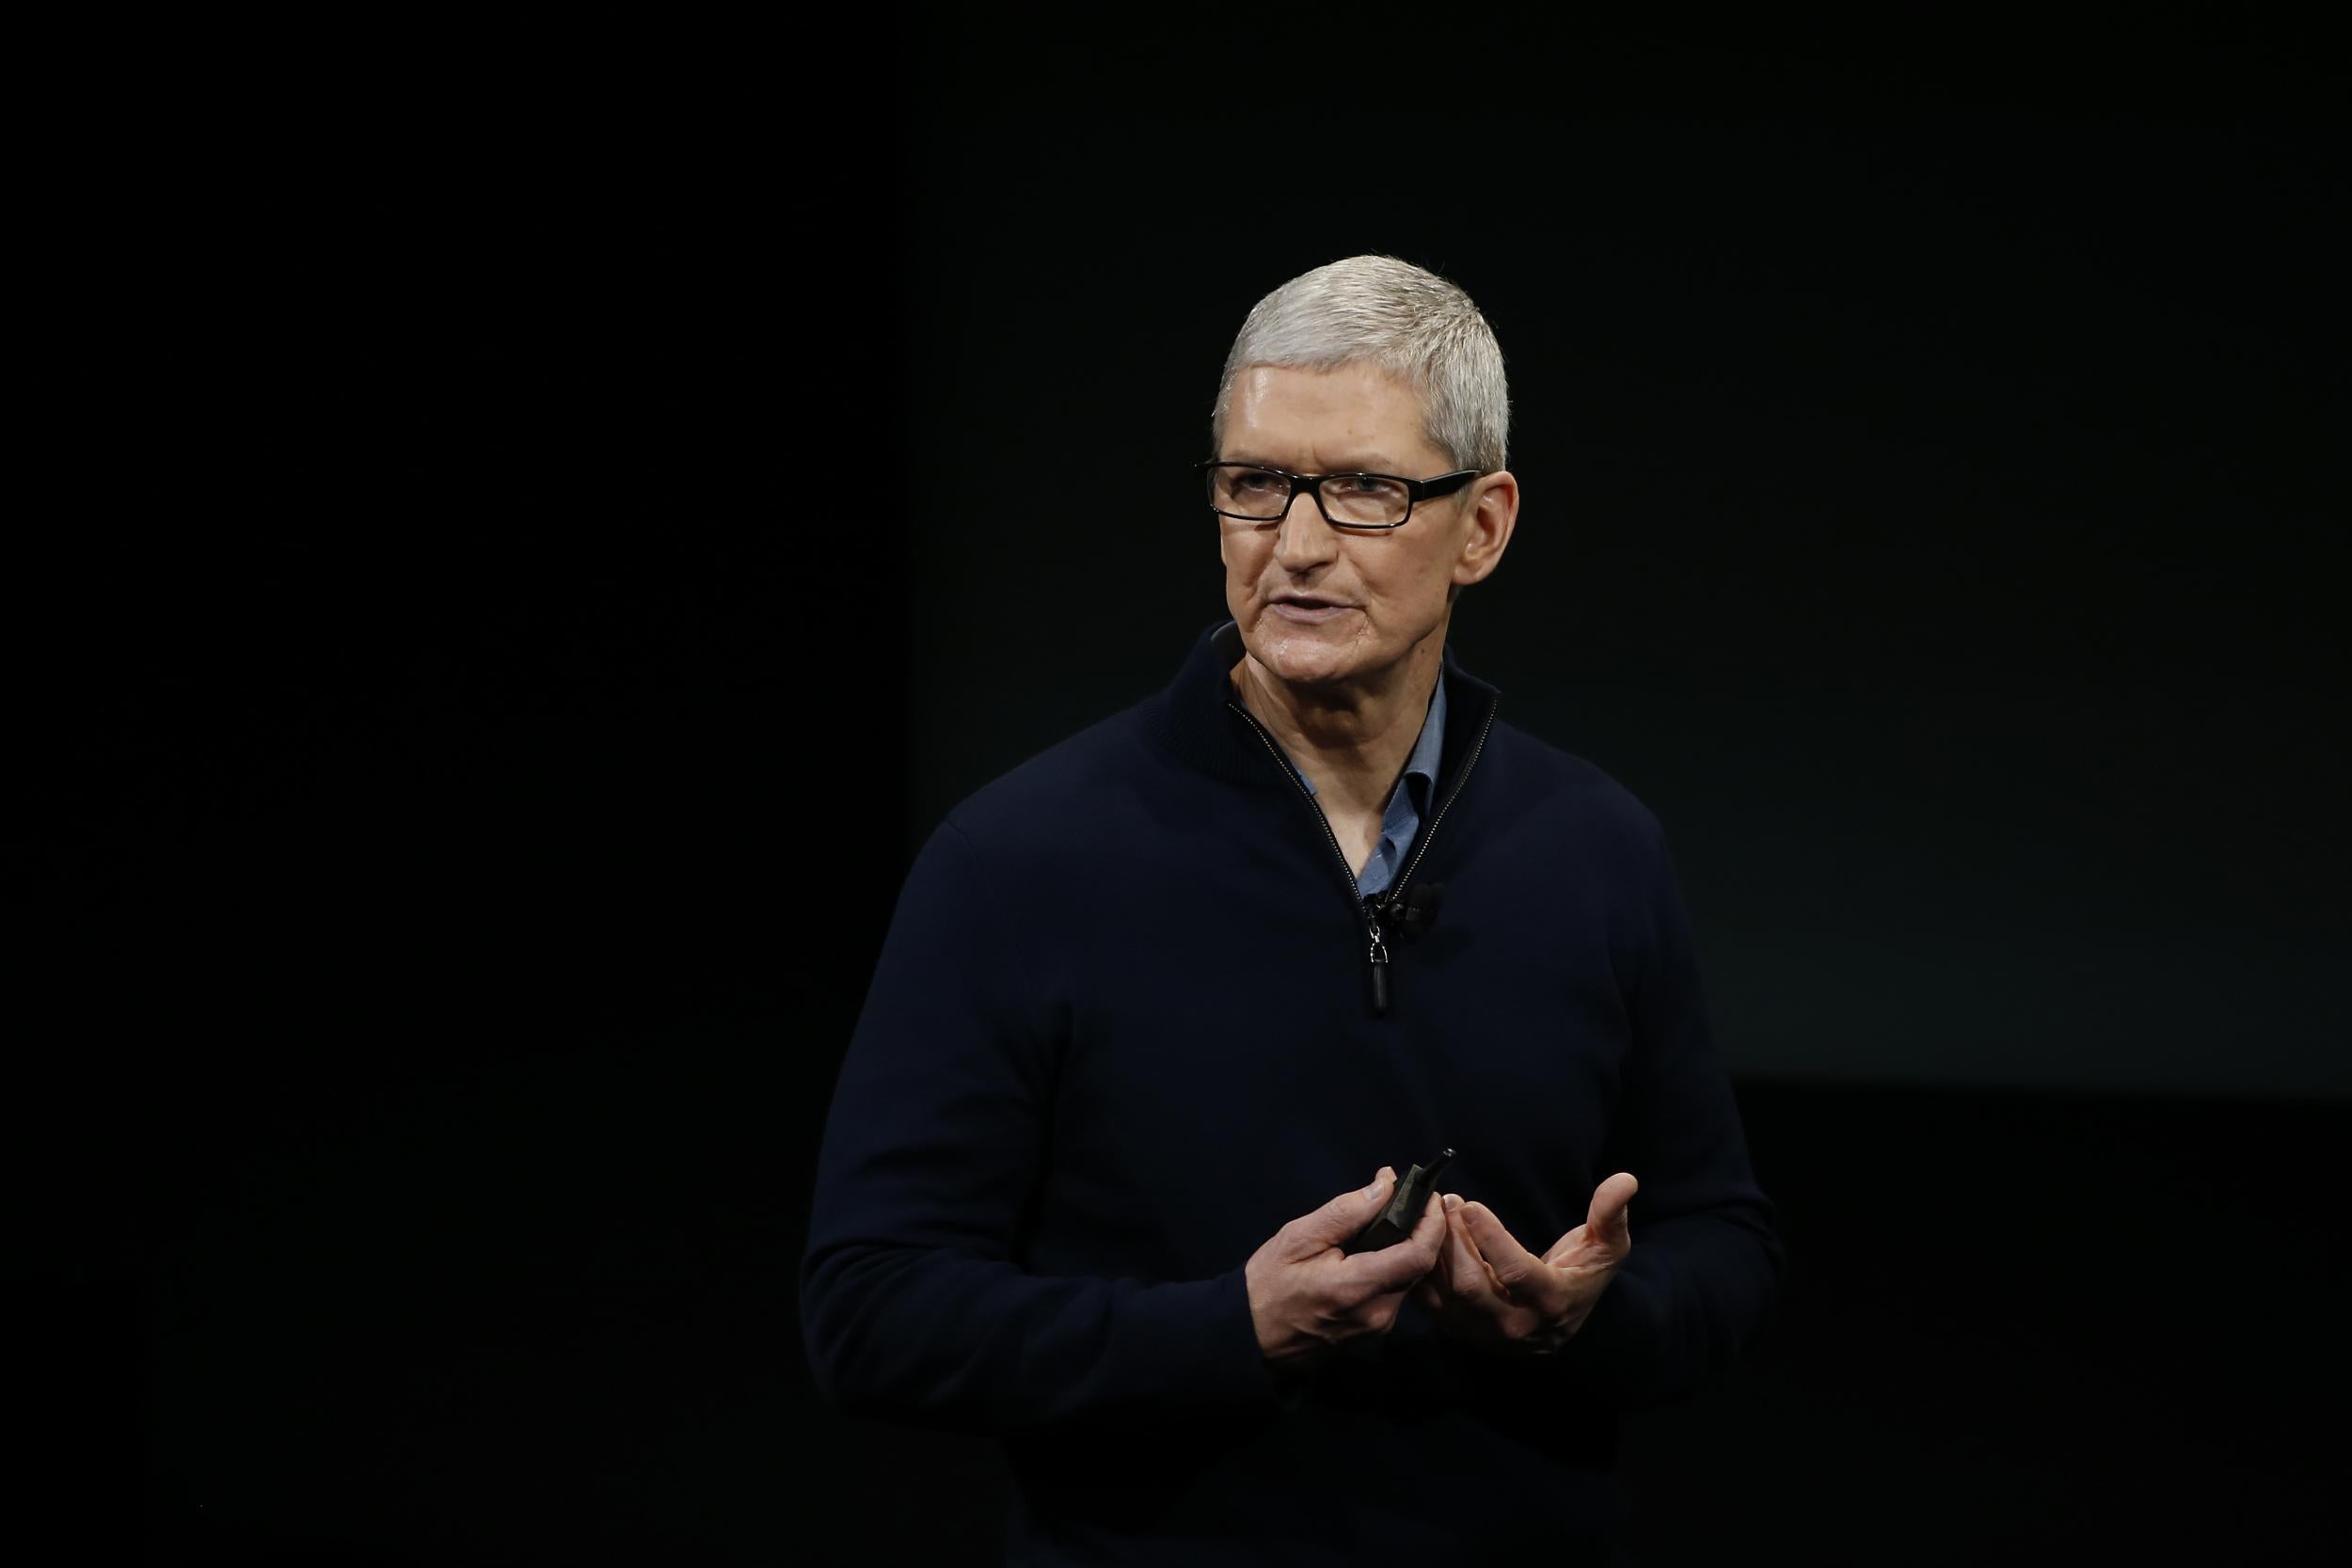 Tim Cook previously said the European Commission ruling is ‘total political crap’ and ‘maddening’